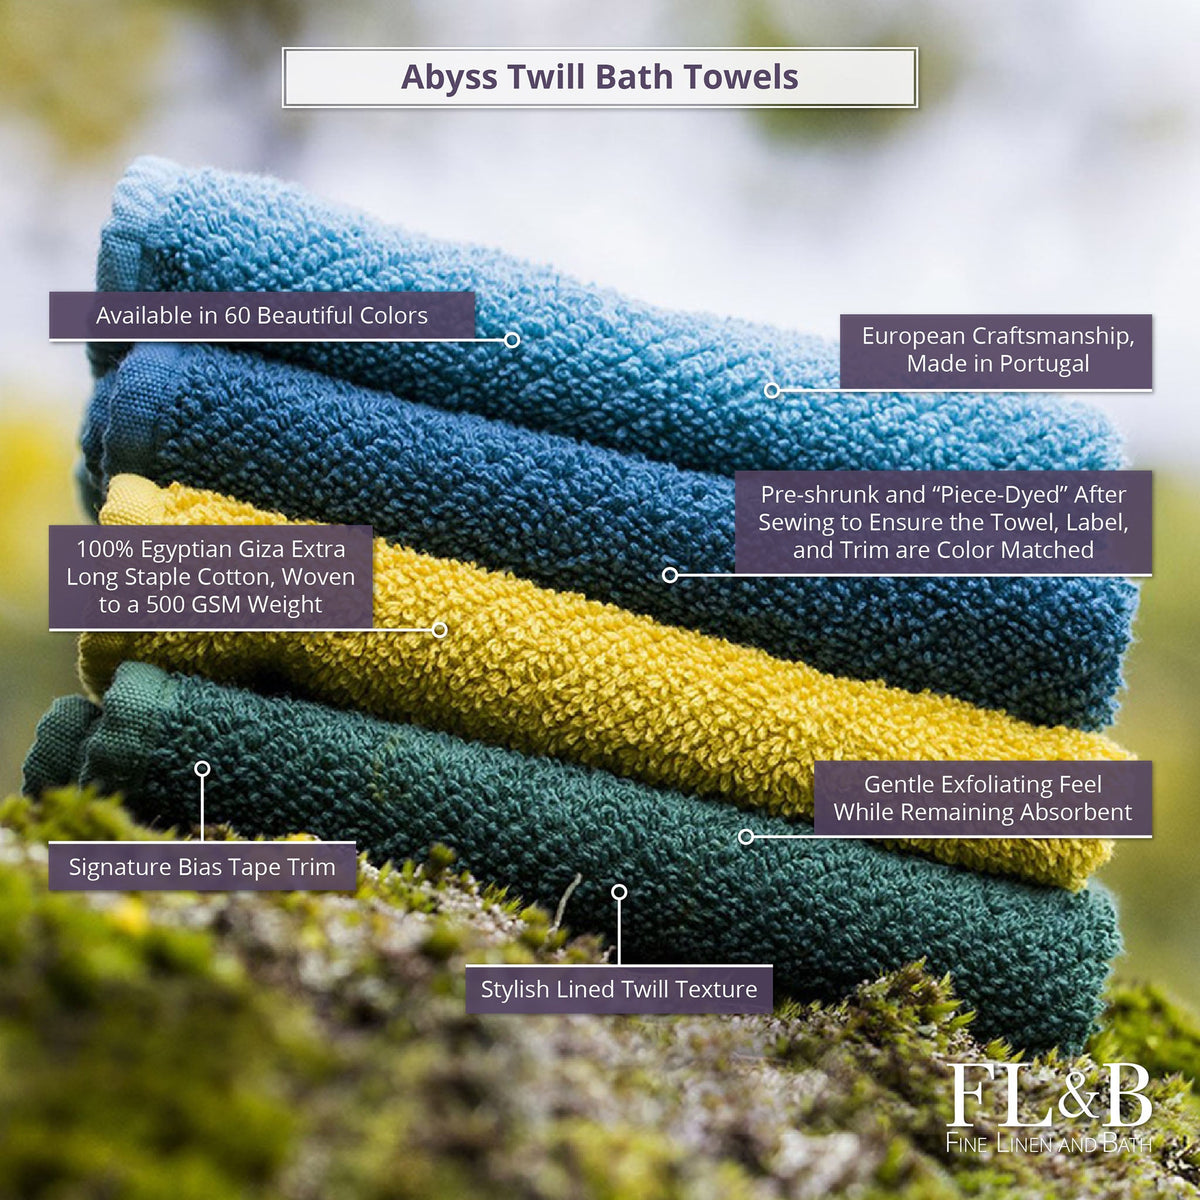 Abyss Twill Bath Towels Folded and Stacked Assorted Colors with Descriptive Labels